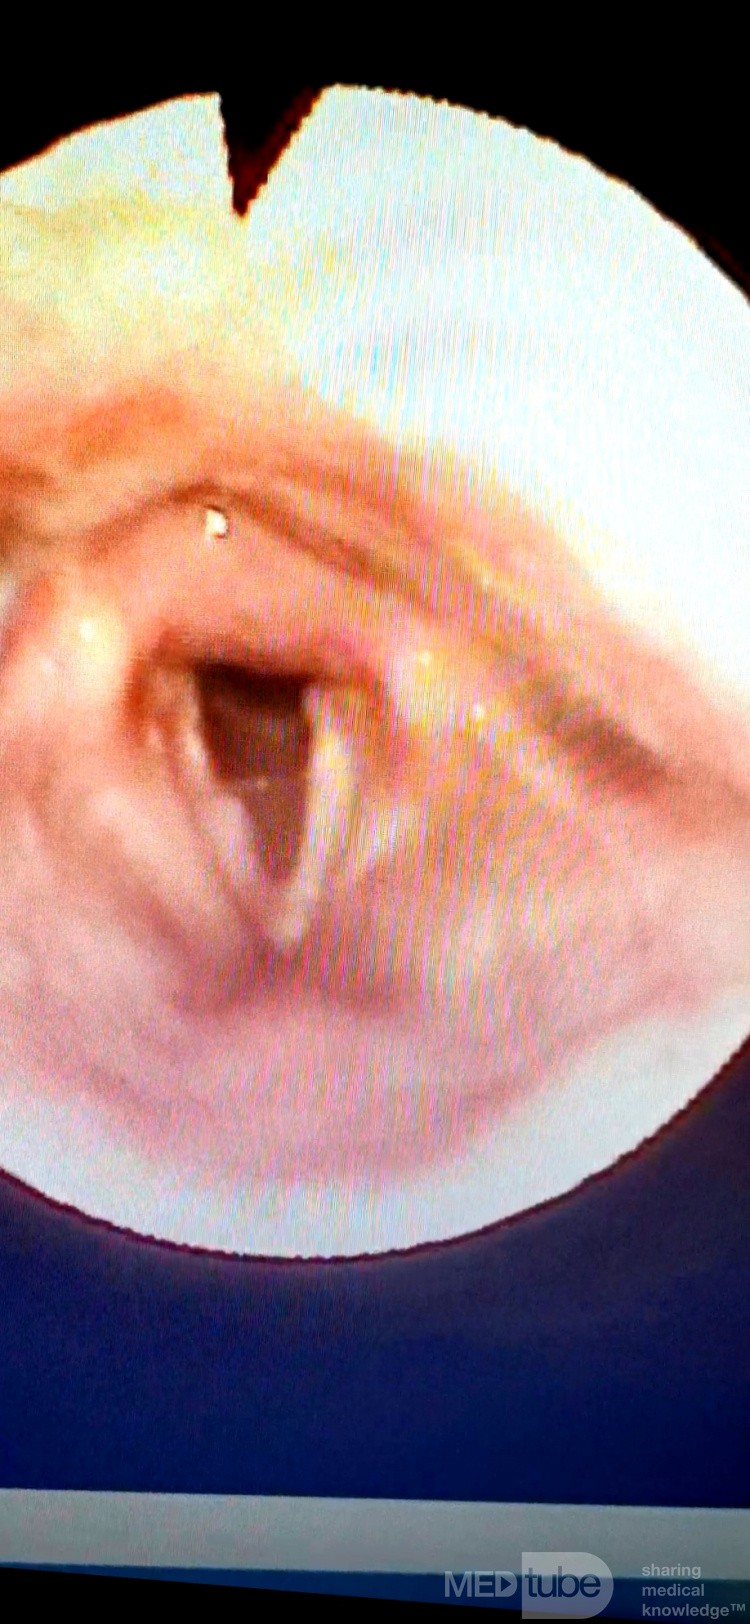 Cancer of the Right Vocal Fold